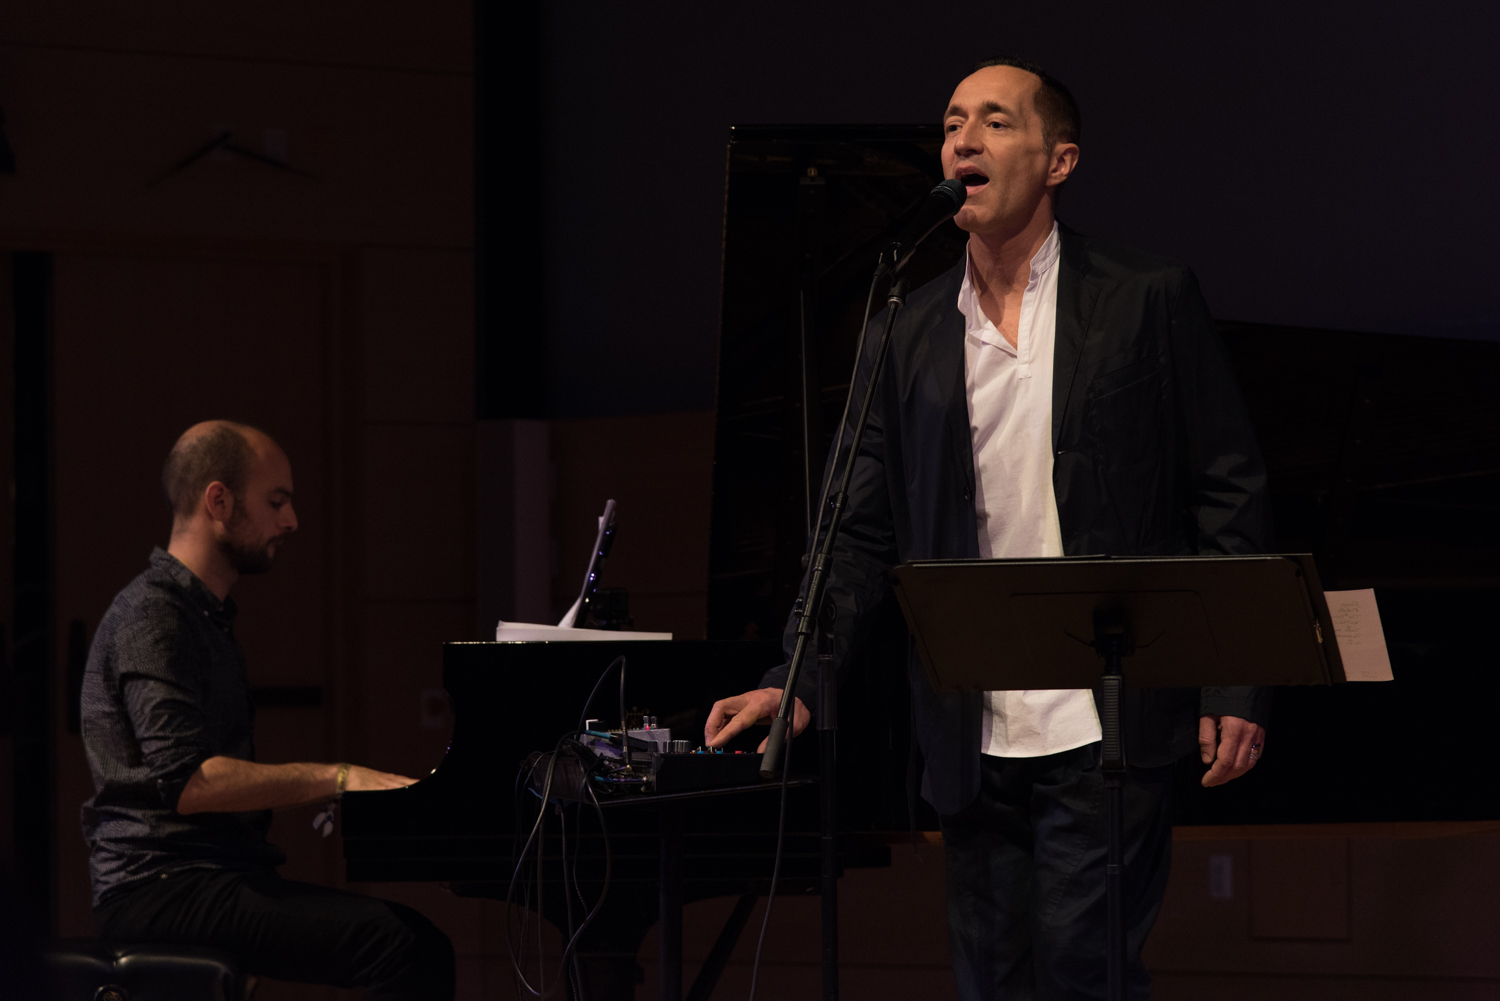 Shai Maestro (piano) and Theo Bleckmann (vocals) performing at New School Tishman Auditorium - ECM Records Stage, January 16.